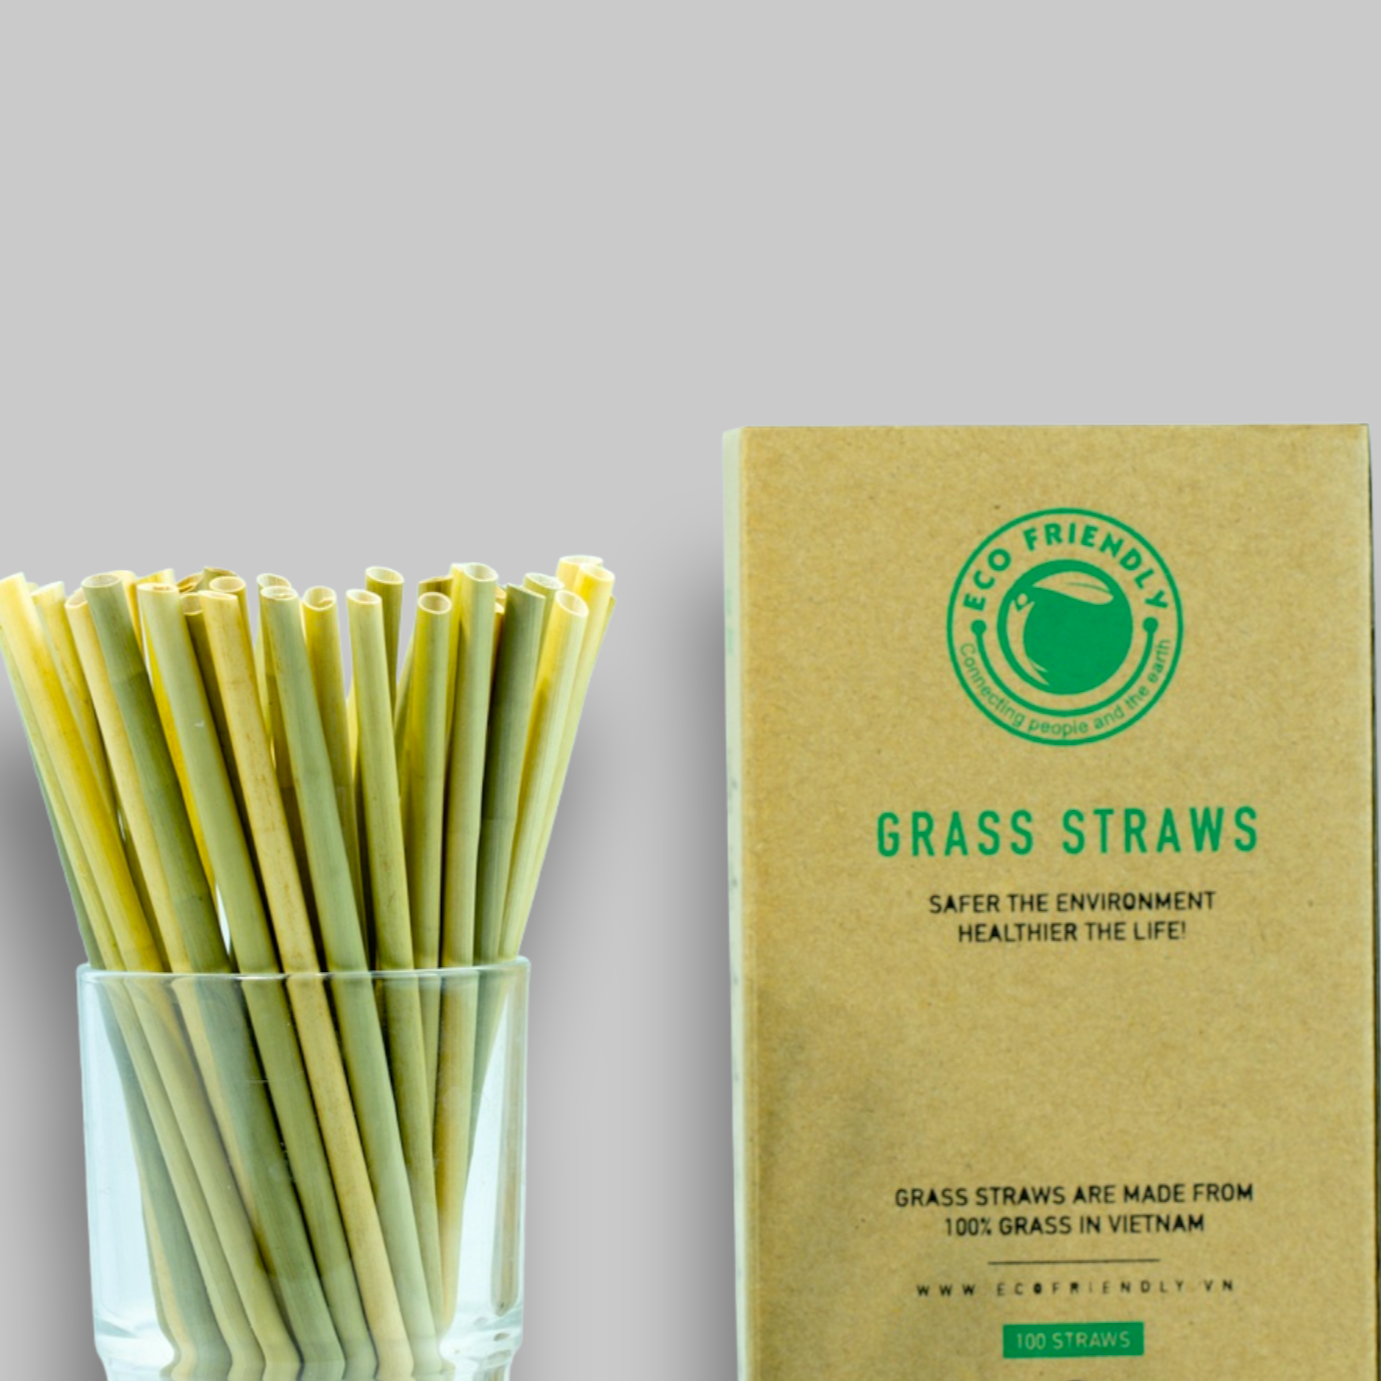 Grass straws are made from grass in Vietnam